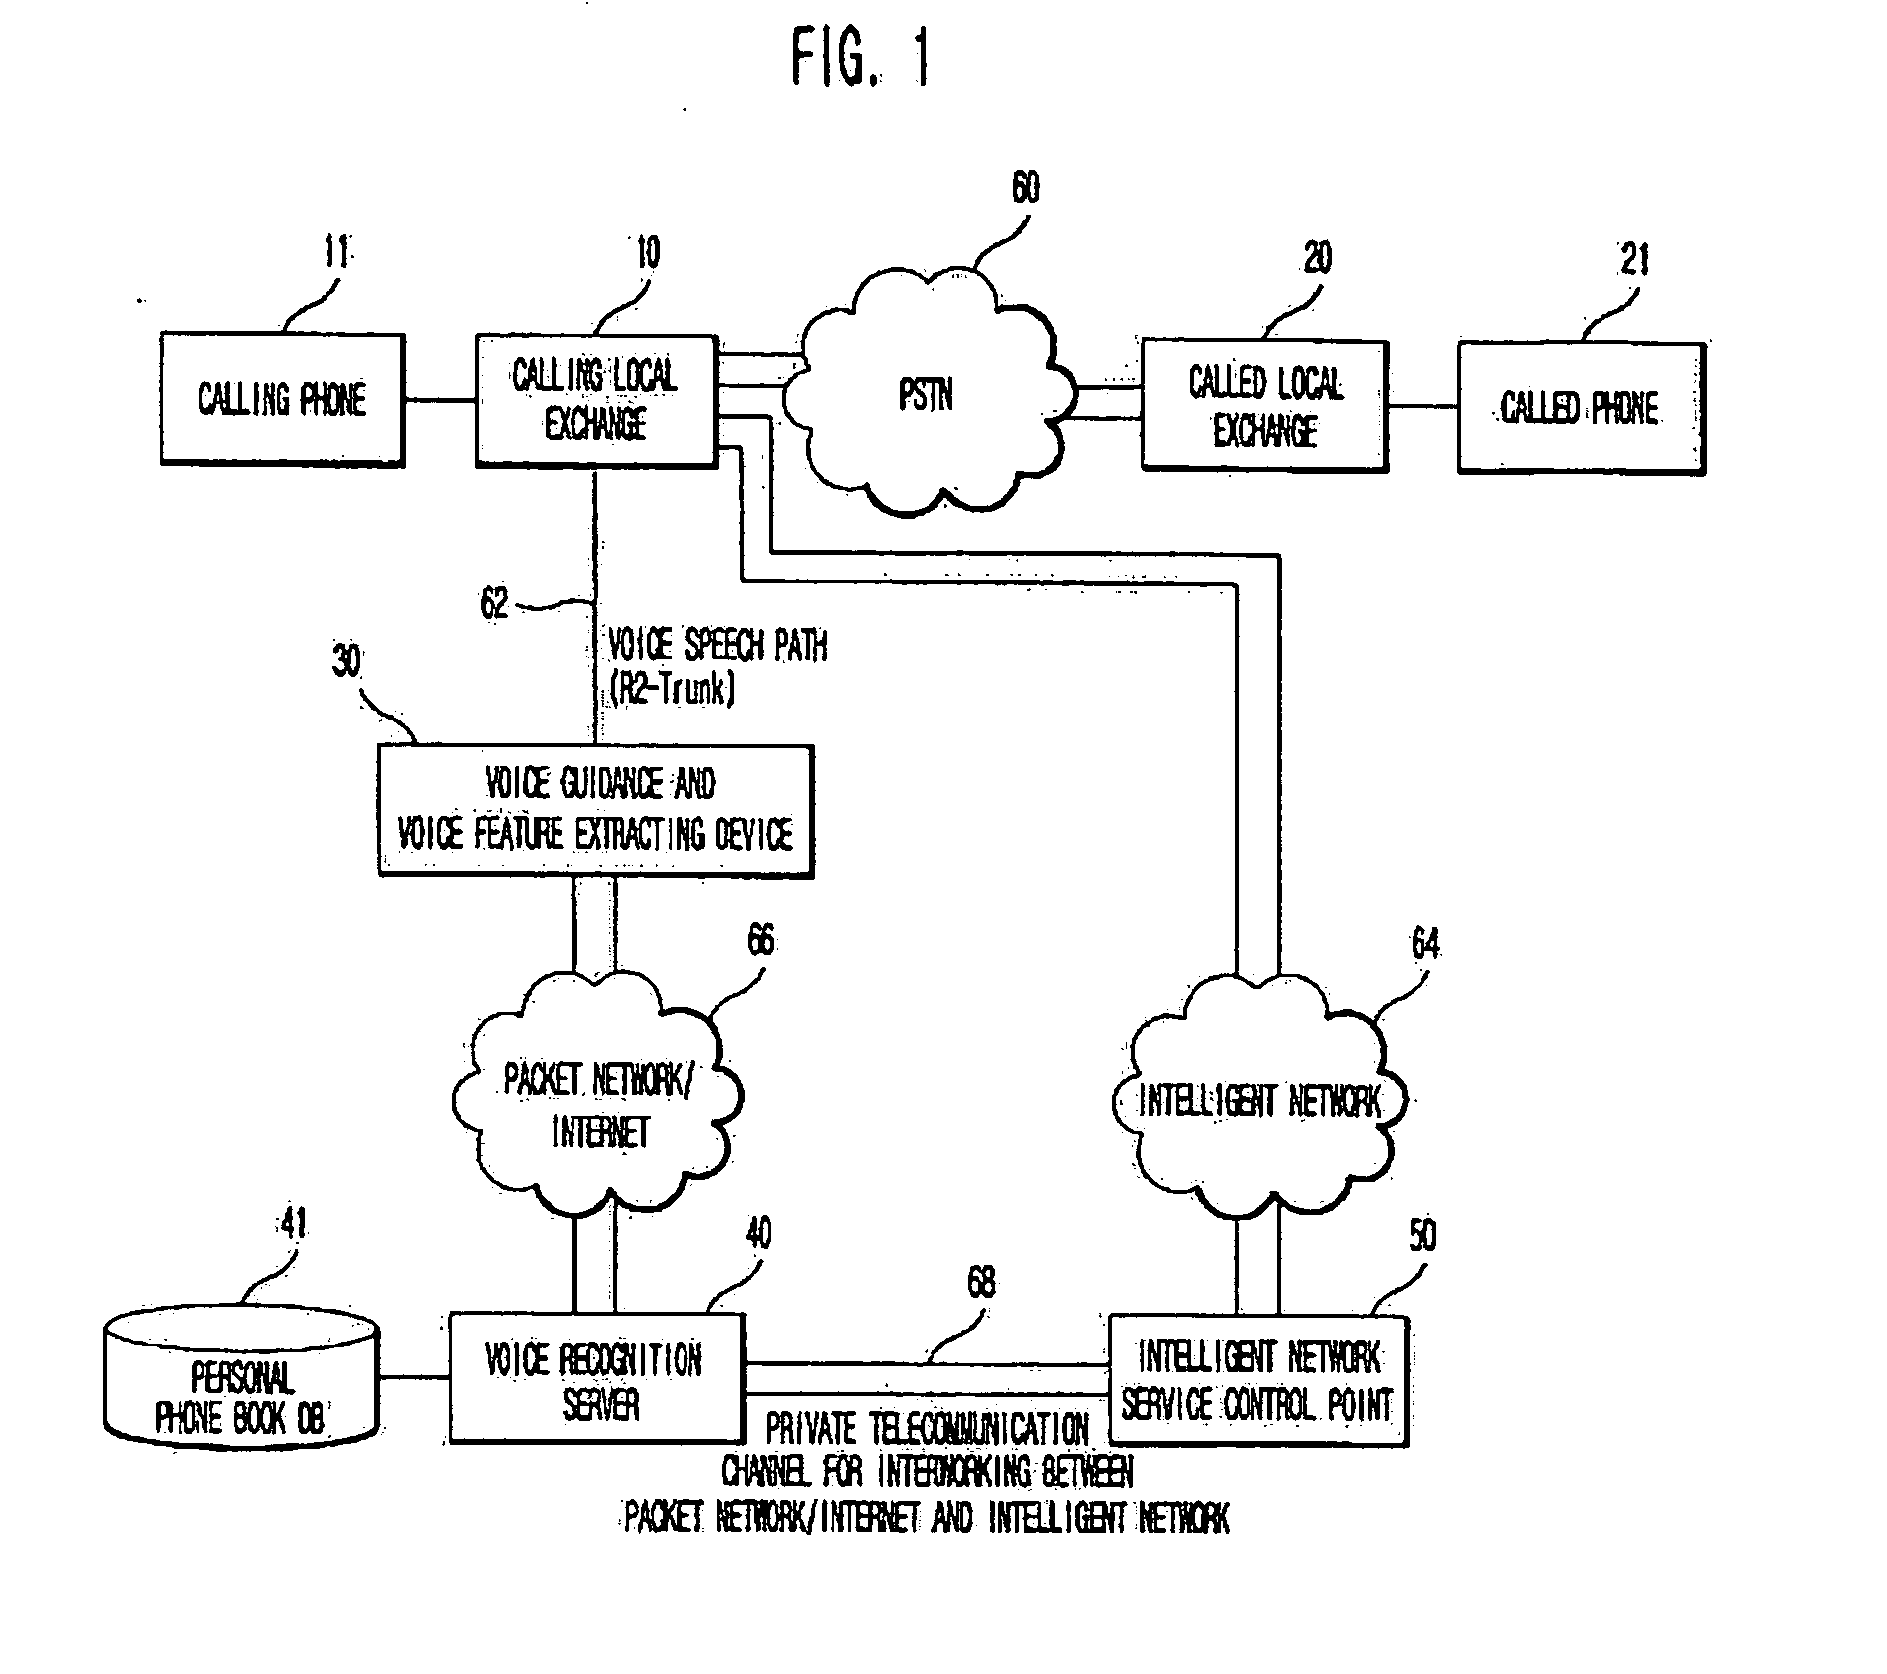 Automatic voice call connection service method using personal phone book databse constructed through voice recognition